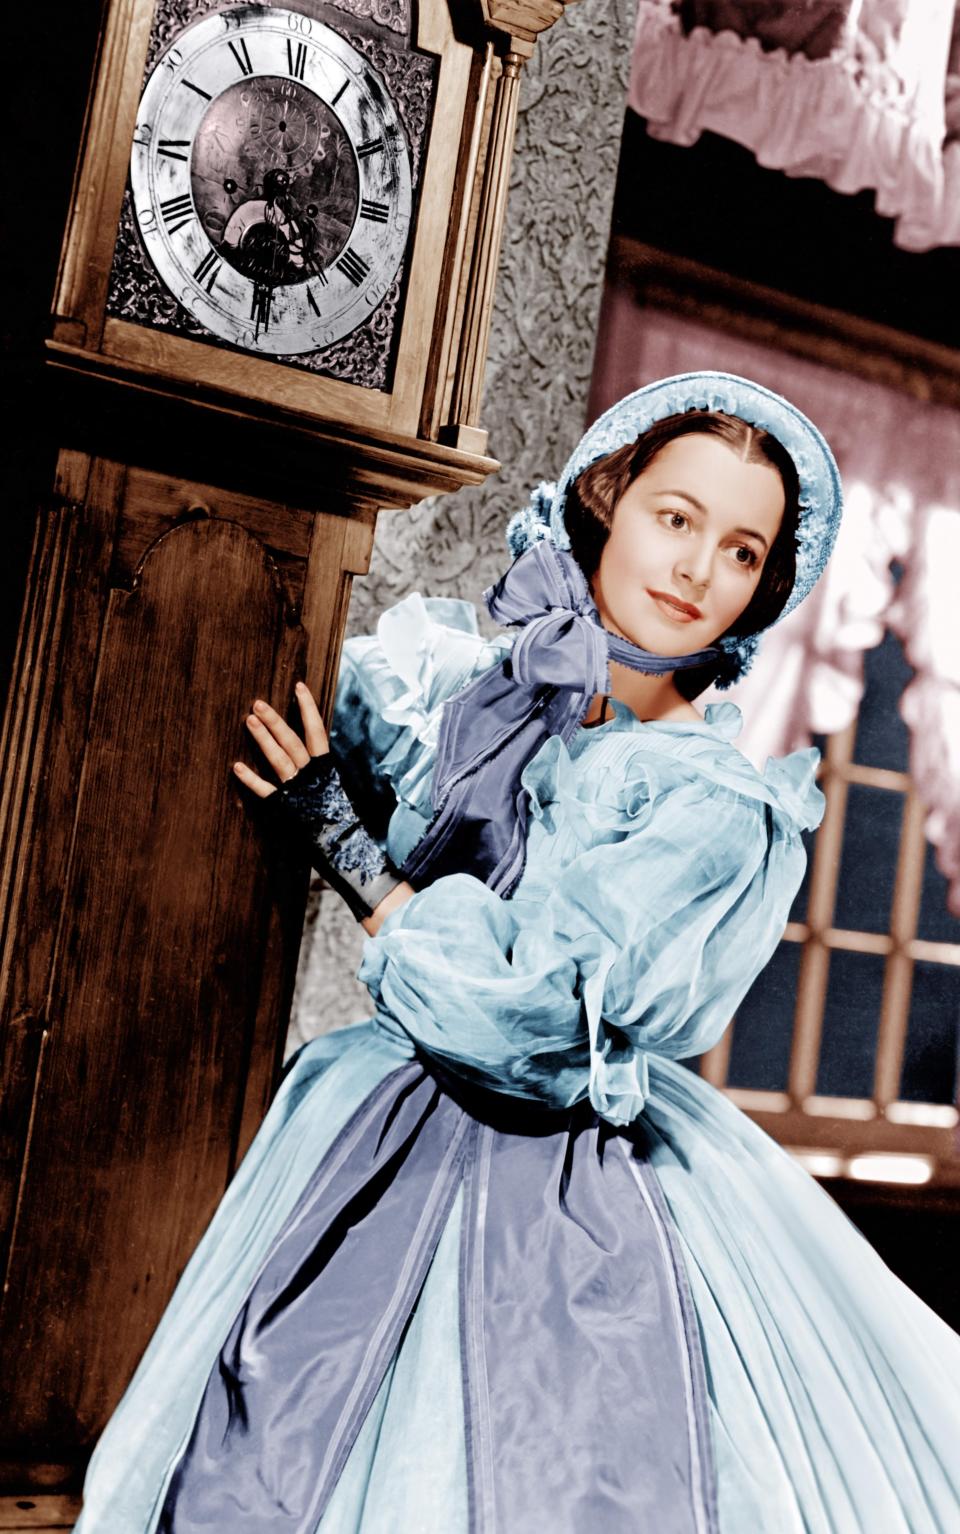 As Melanie in Gone With The Wind - Everett/REX Shutterstock/Everett/REX Shutterstock